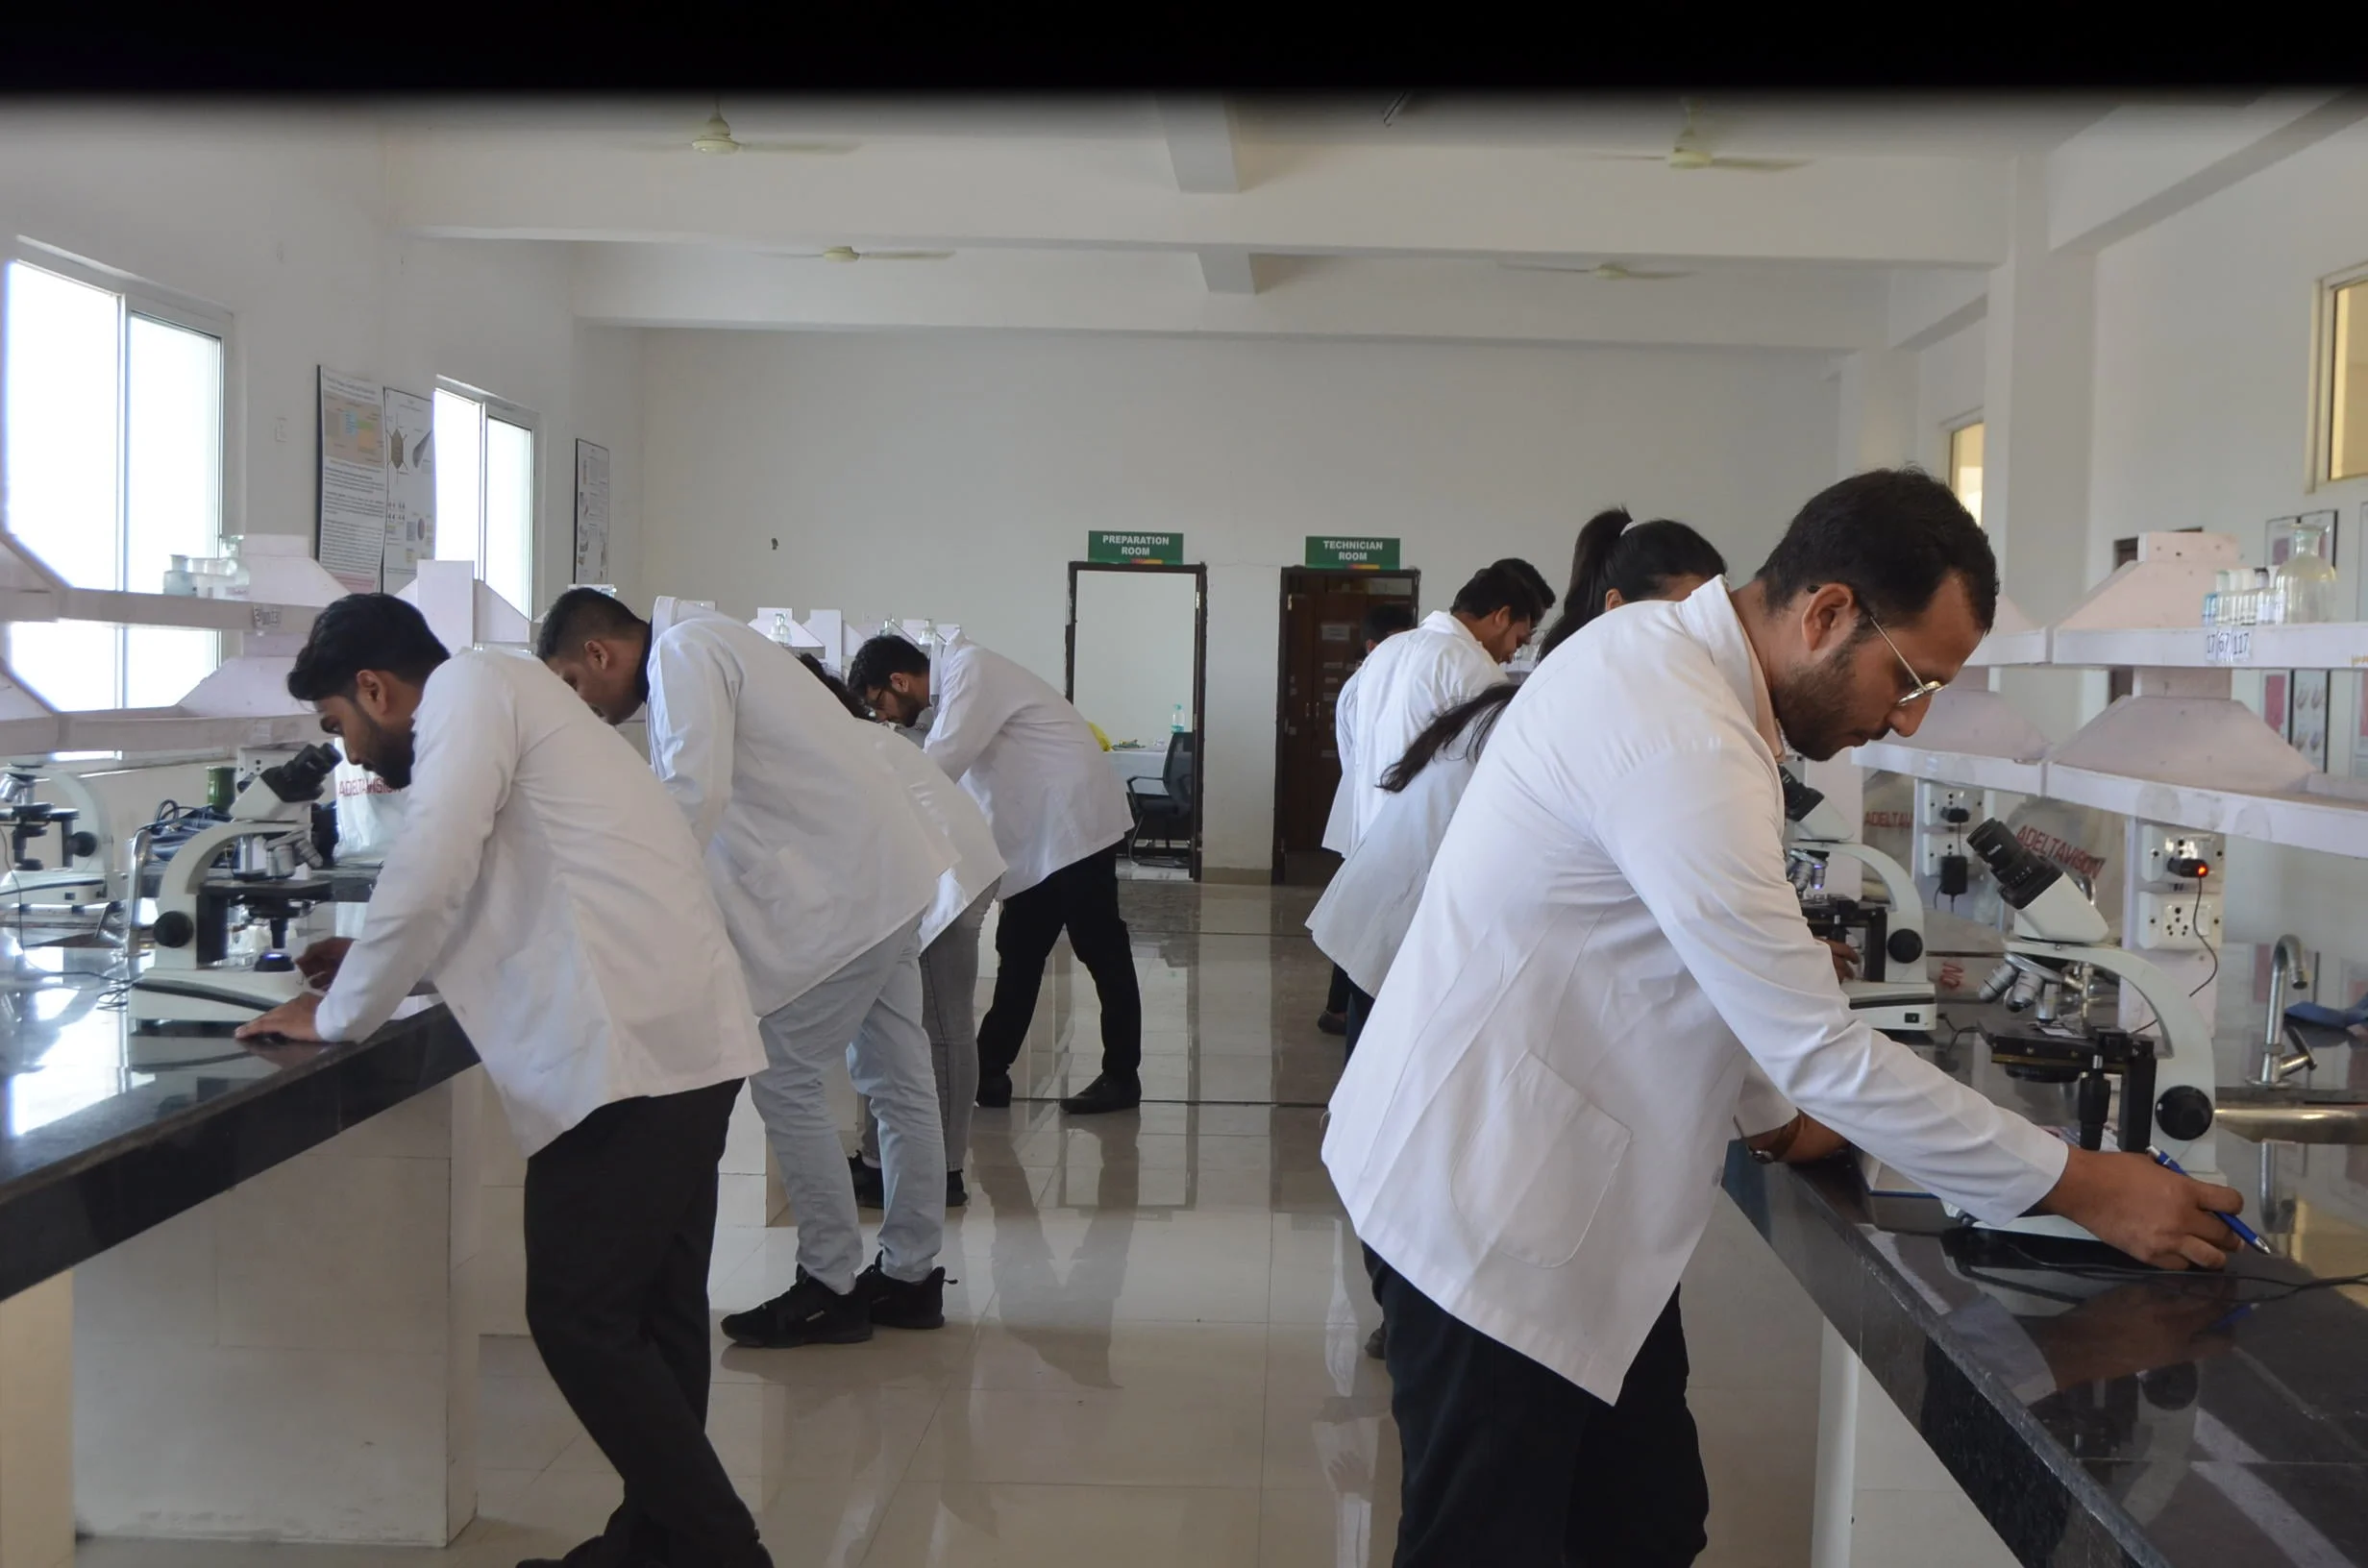 Six Medical Students doing Practical